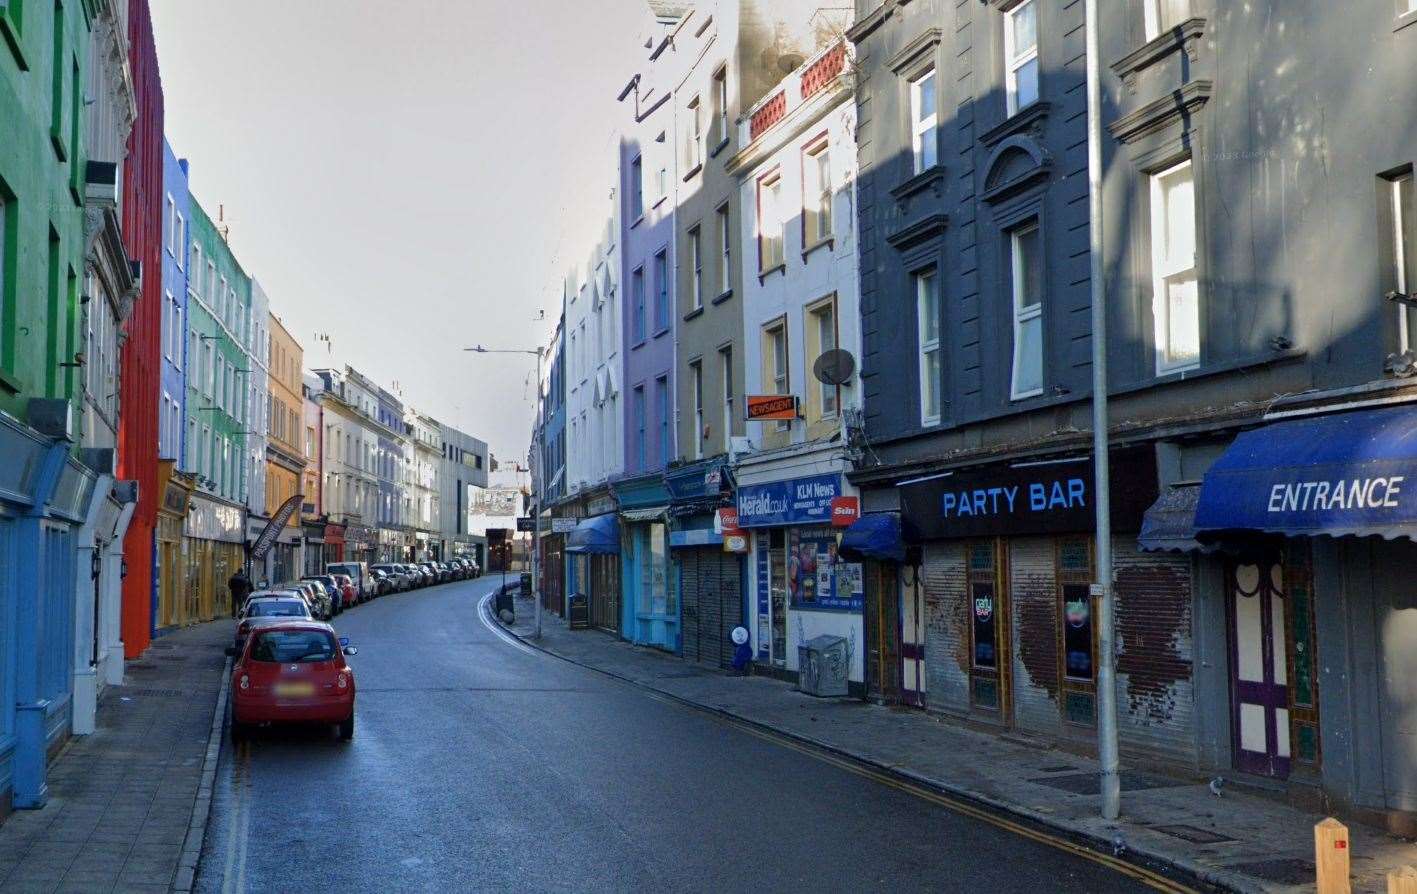 A business in Tontine Street, Folkestone also reported a burglary to police during this period. Picture: Google